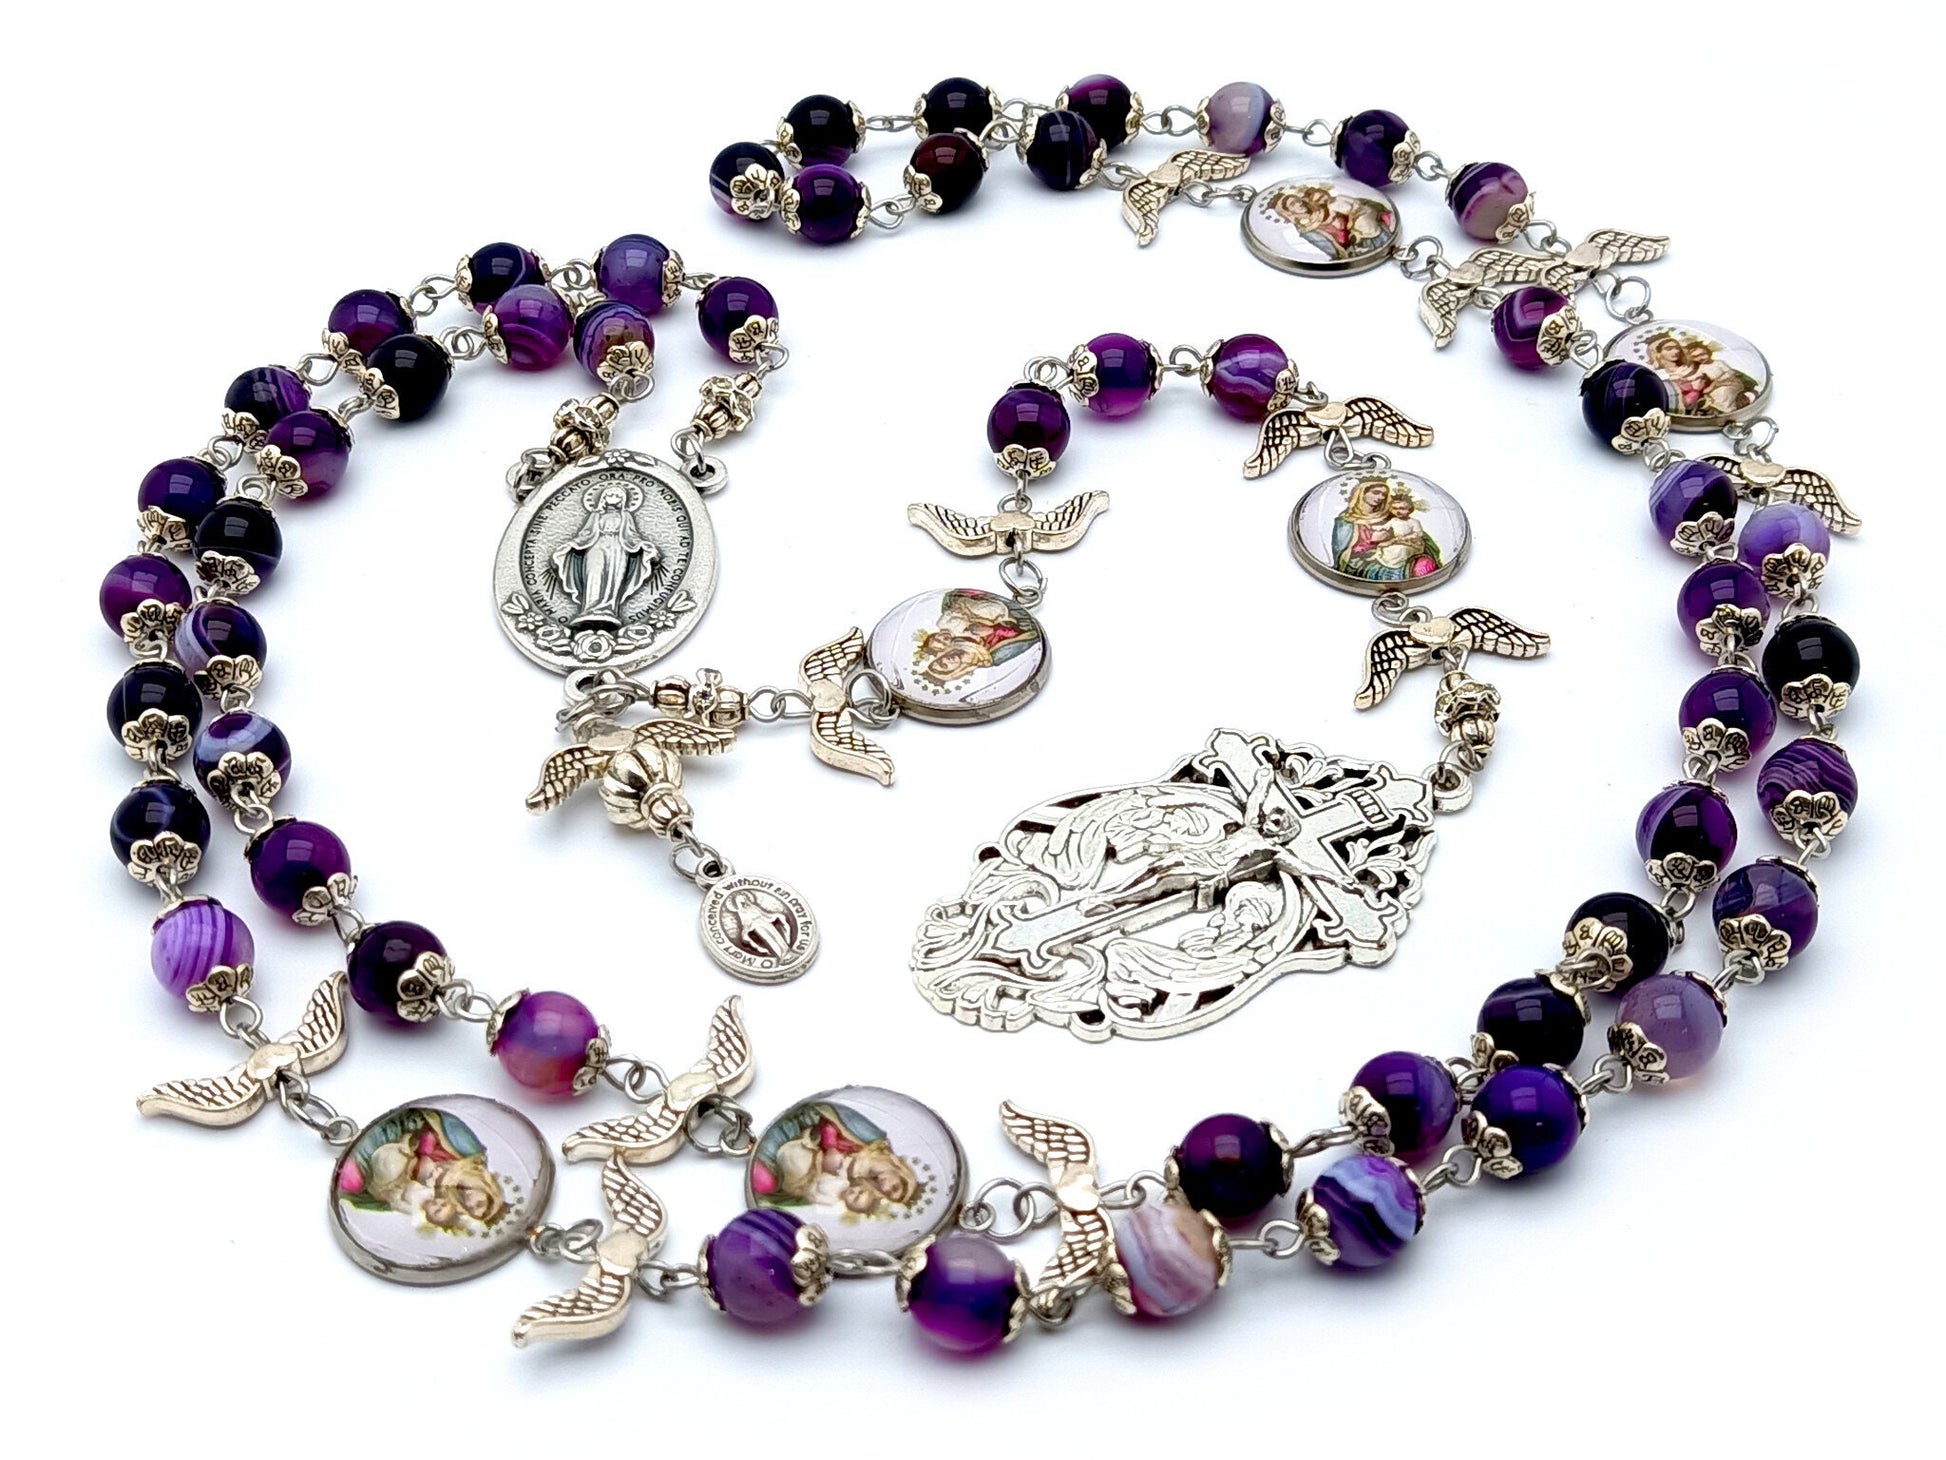 Our Lady of Mount Carmel unique rosary beads with purple agate gemstone and silver winged dove  beads, silver Holy Angels crucifix and centre medal.